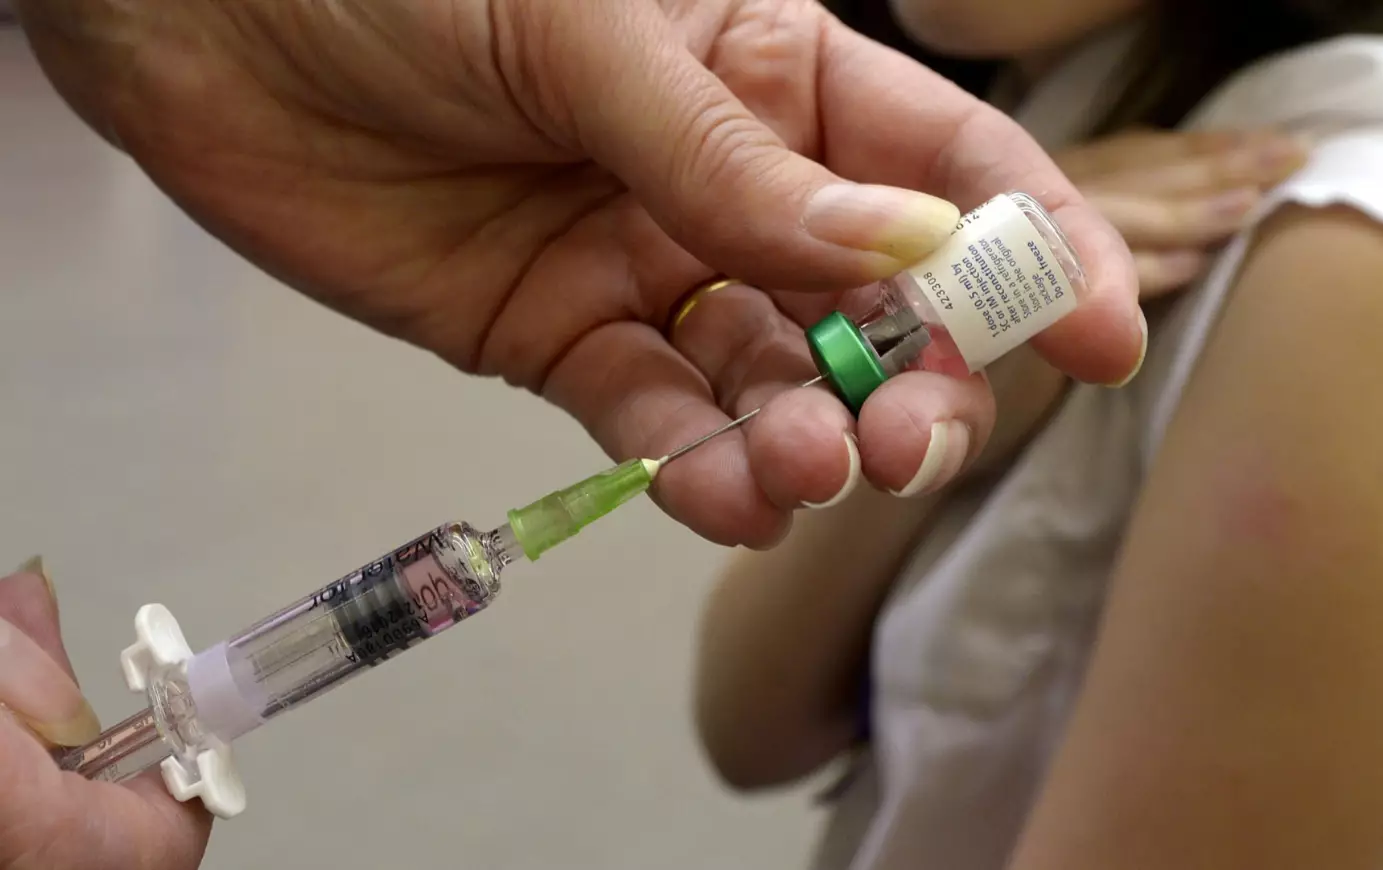 A measles vaccination.